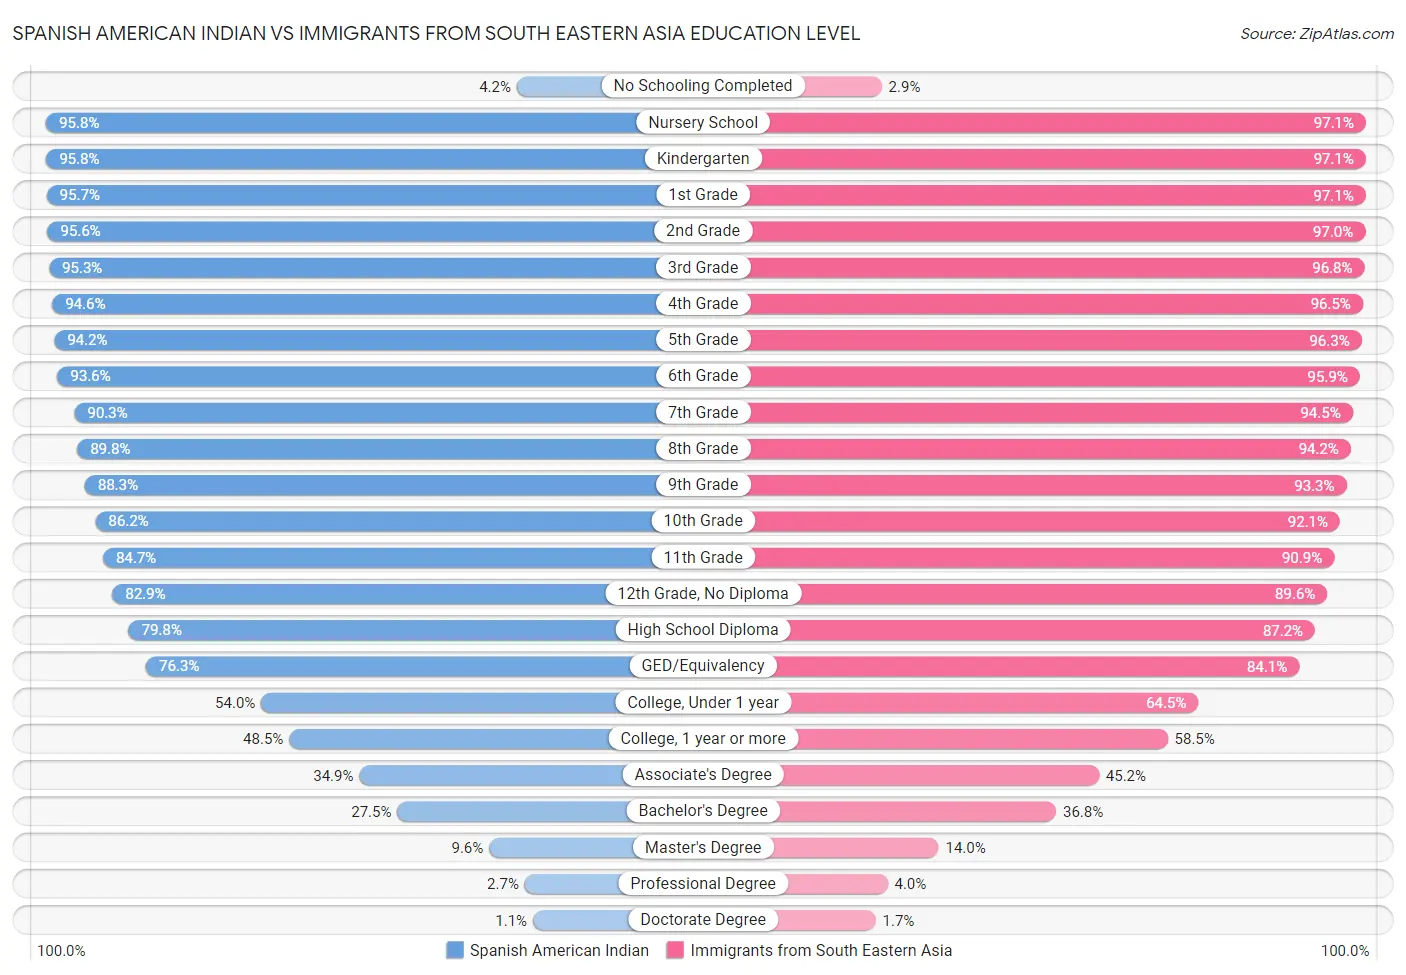 Spanish American Indian vs Immigrants from South Eastern Asia Education Level